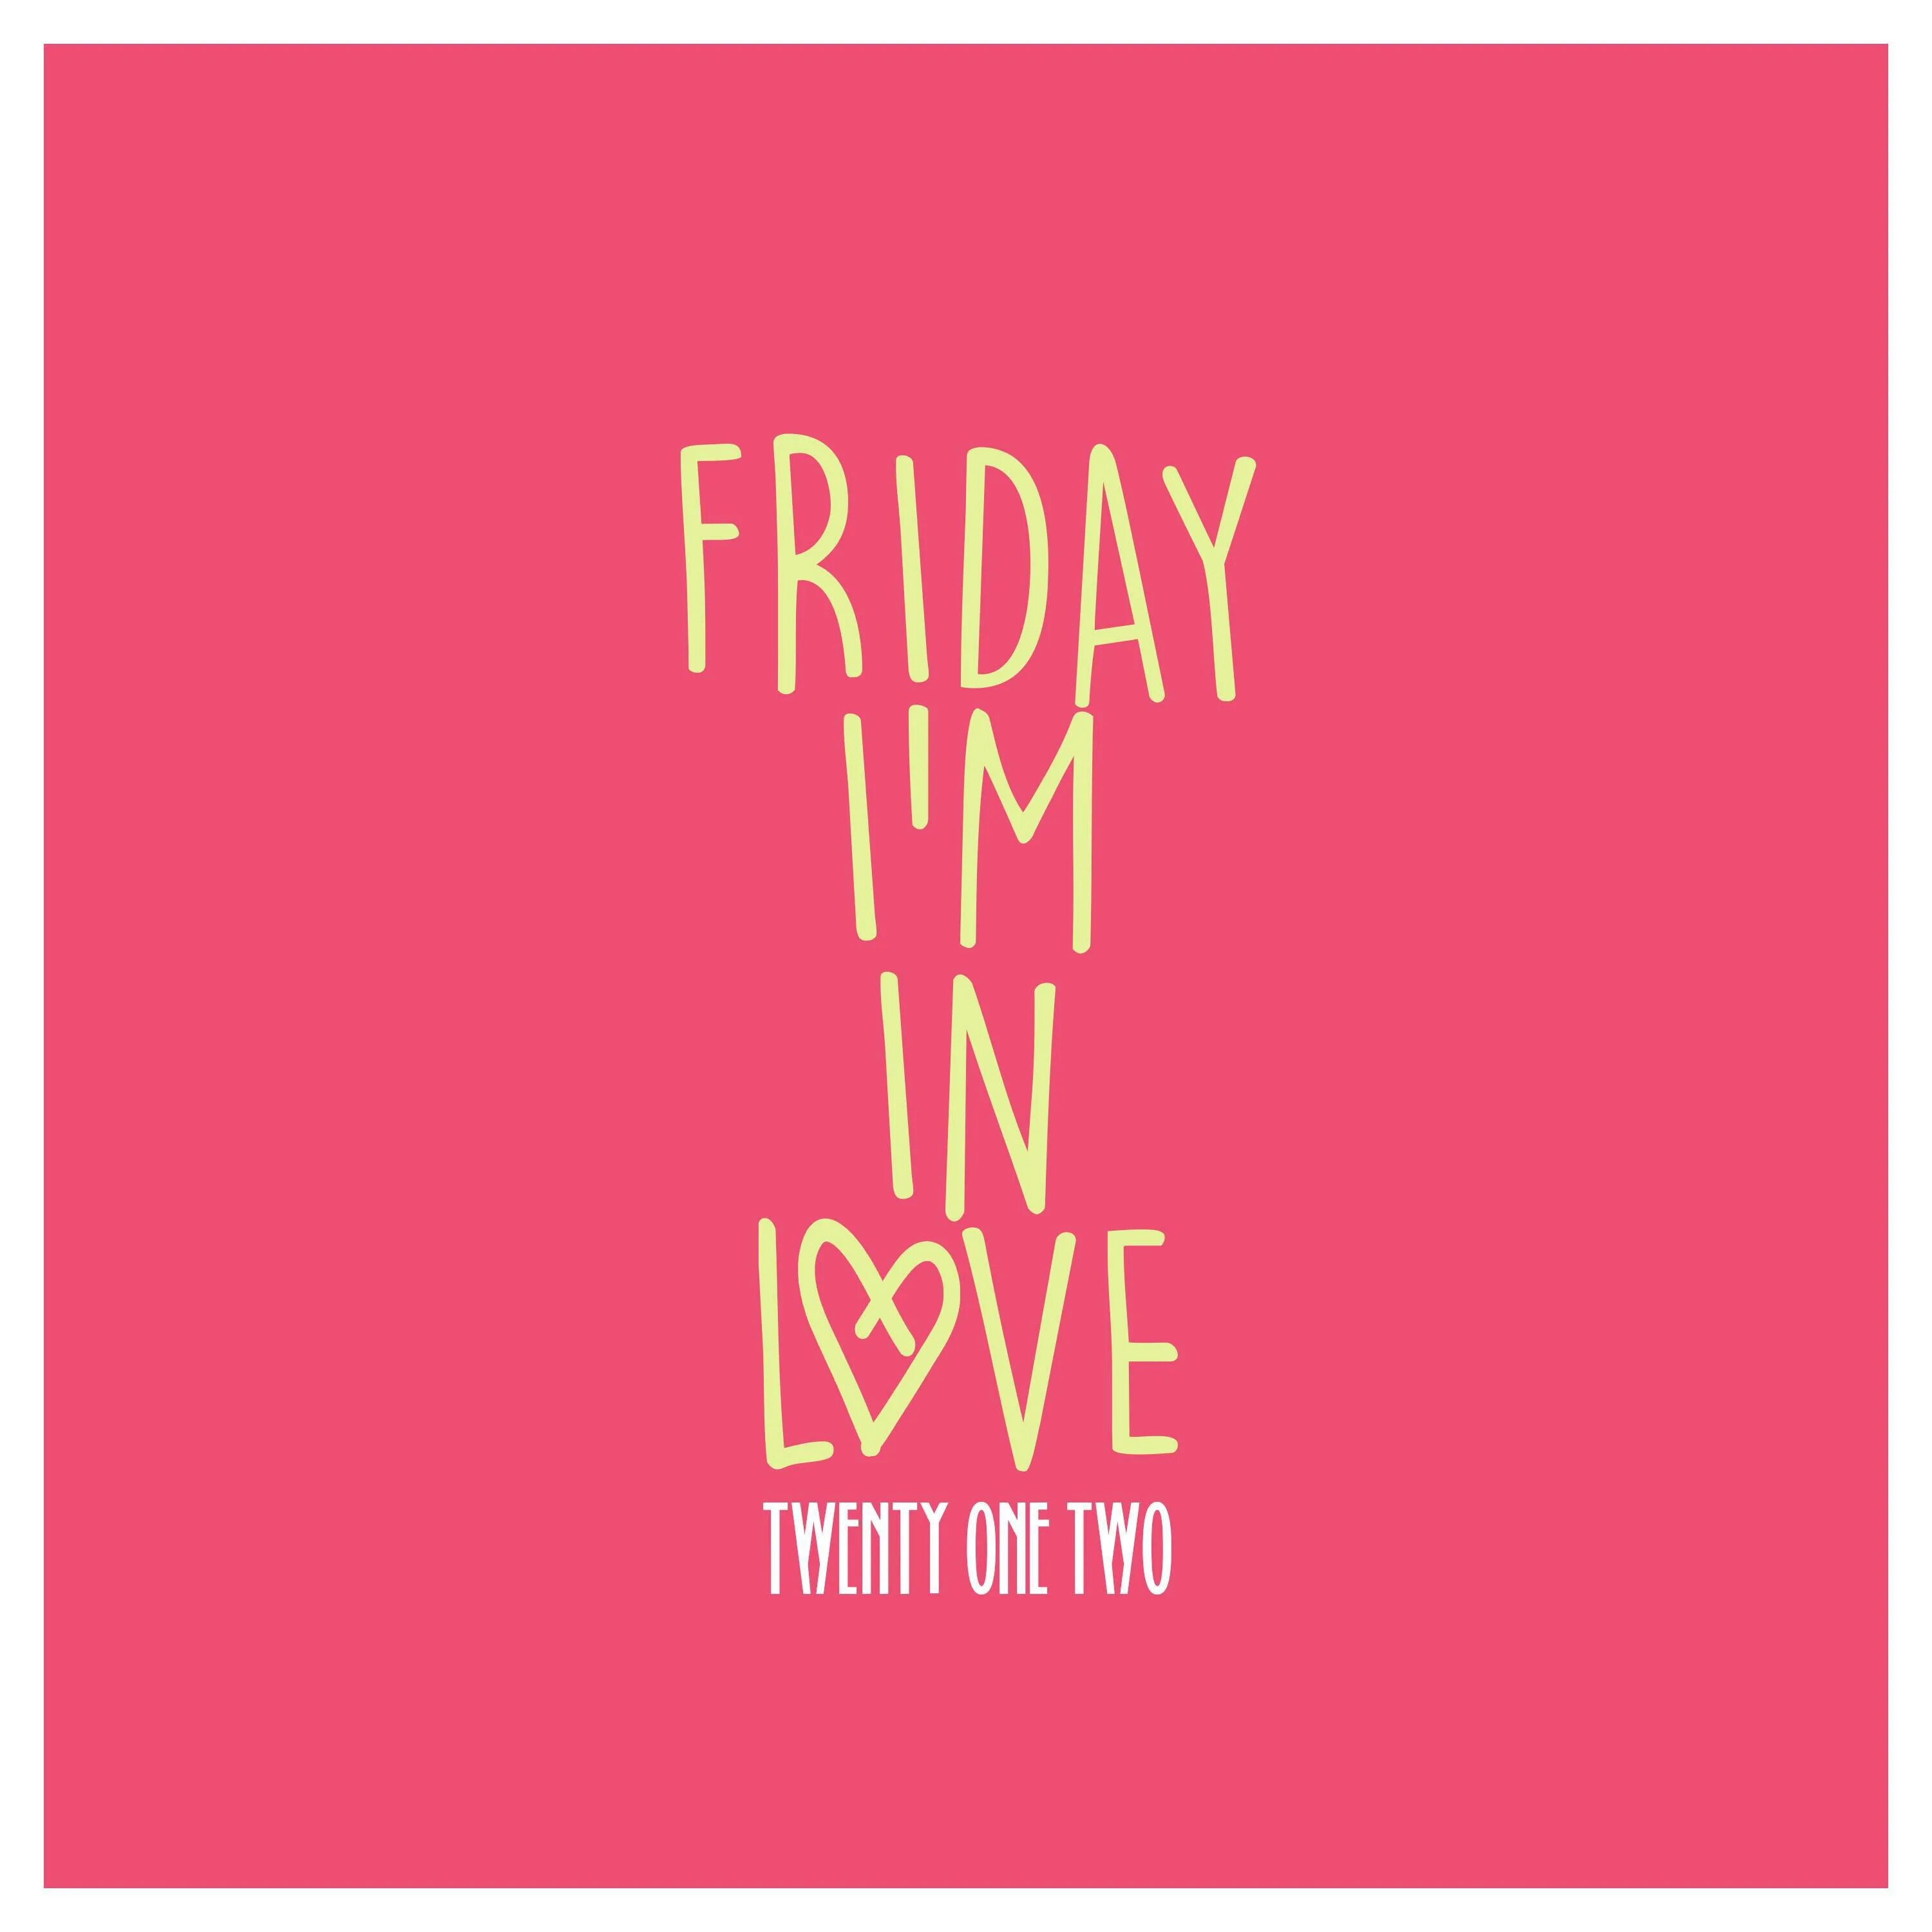 Friday i m in love the cure. Friday i/m in Love. Friday im in Love. Twenty one two.